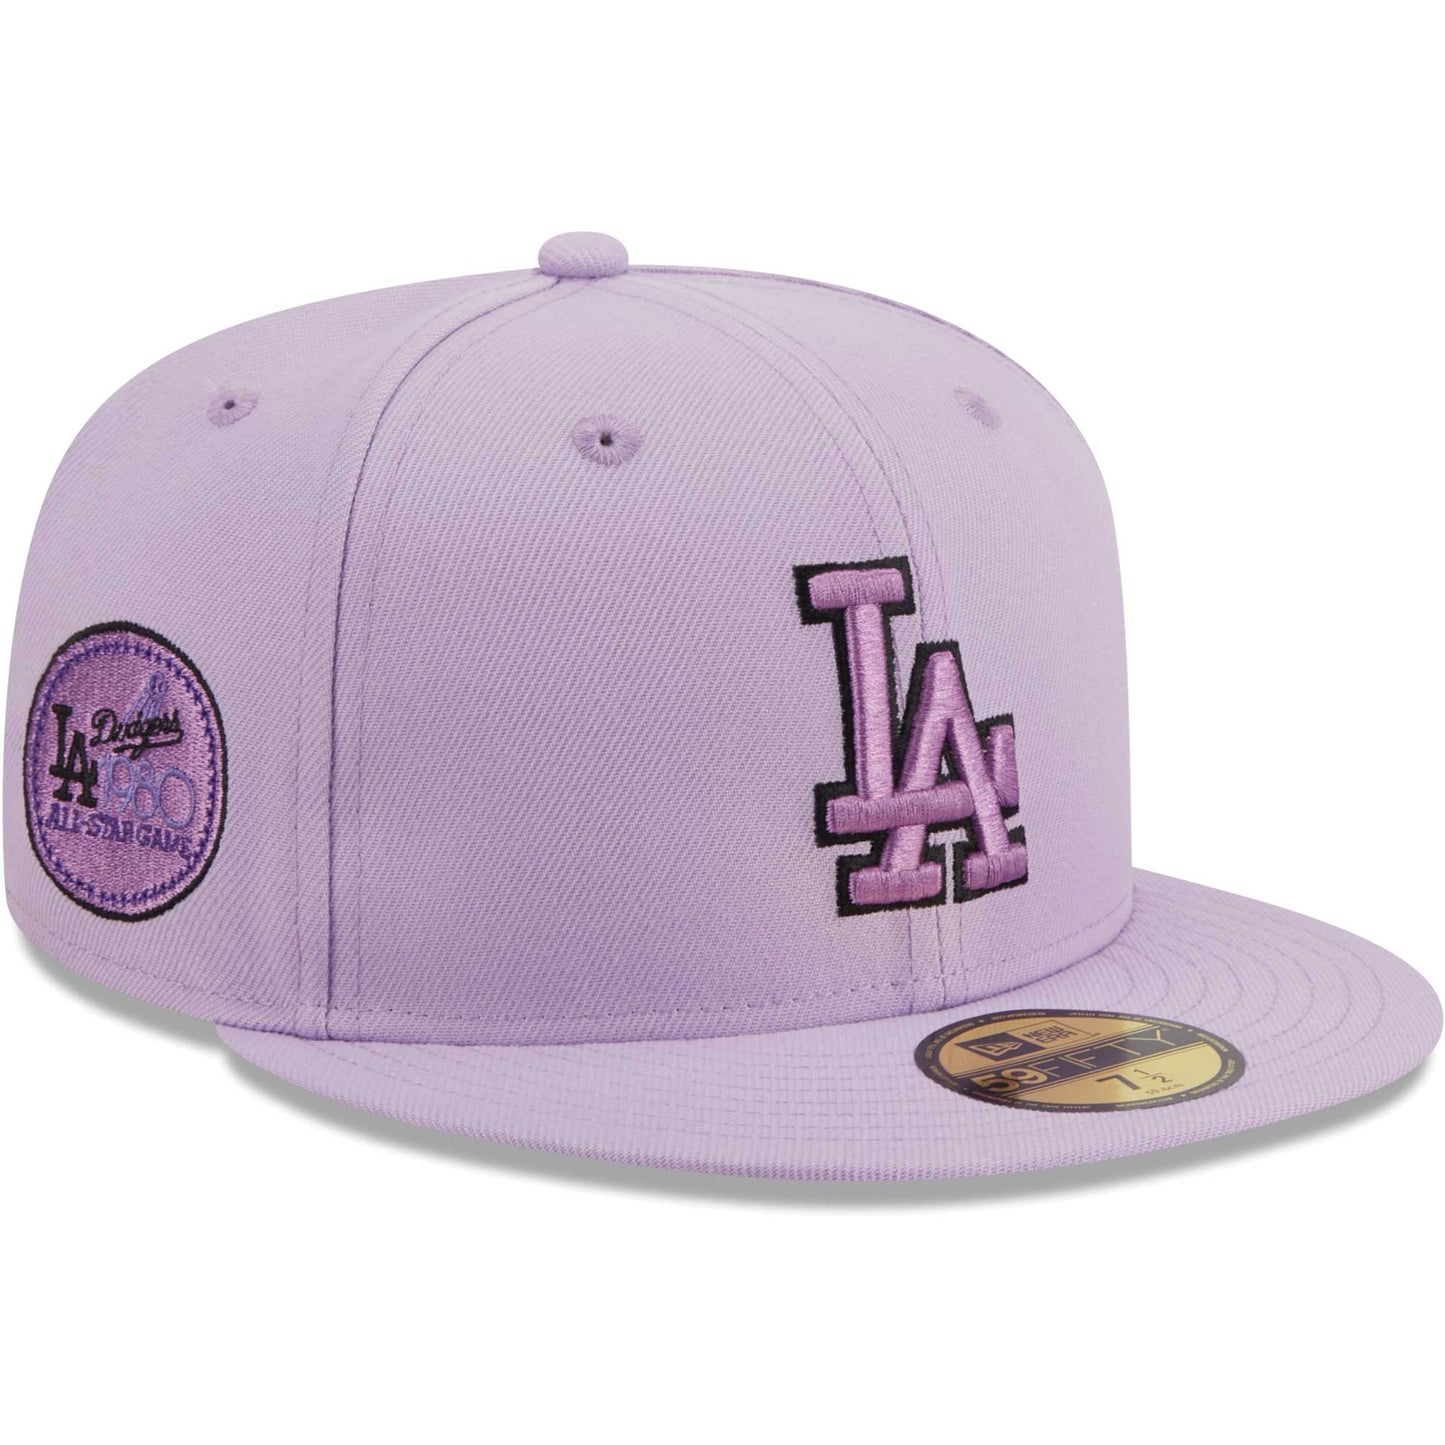 Los Angeles Dodgers New Era 59FIFTY Fitted Hat - Lavender